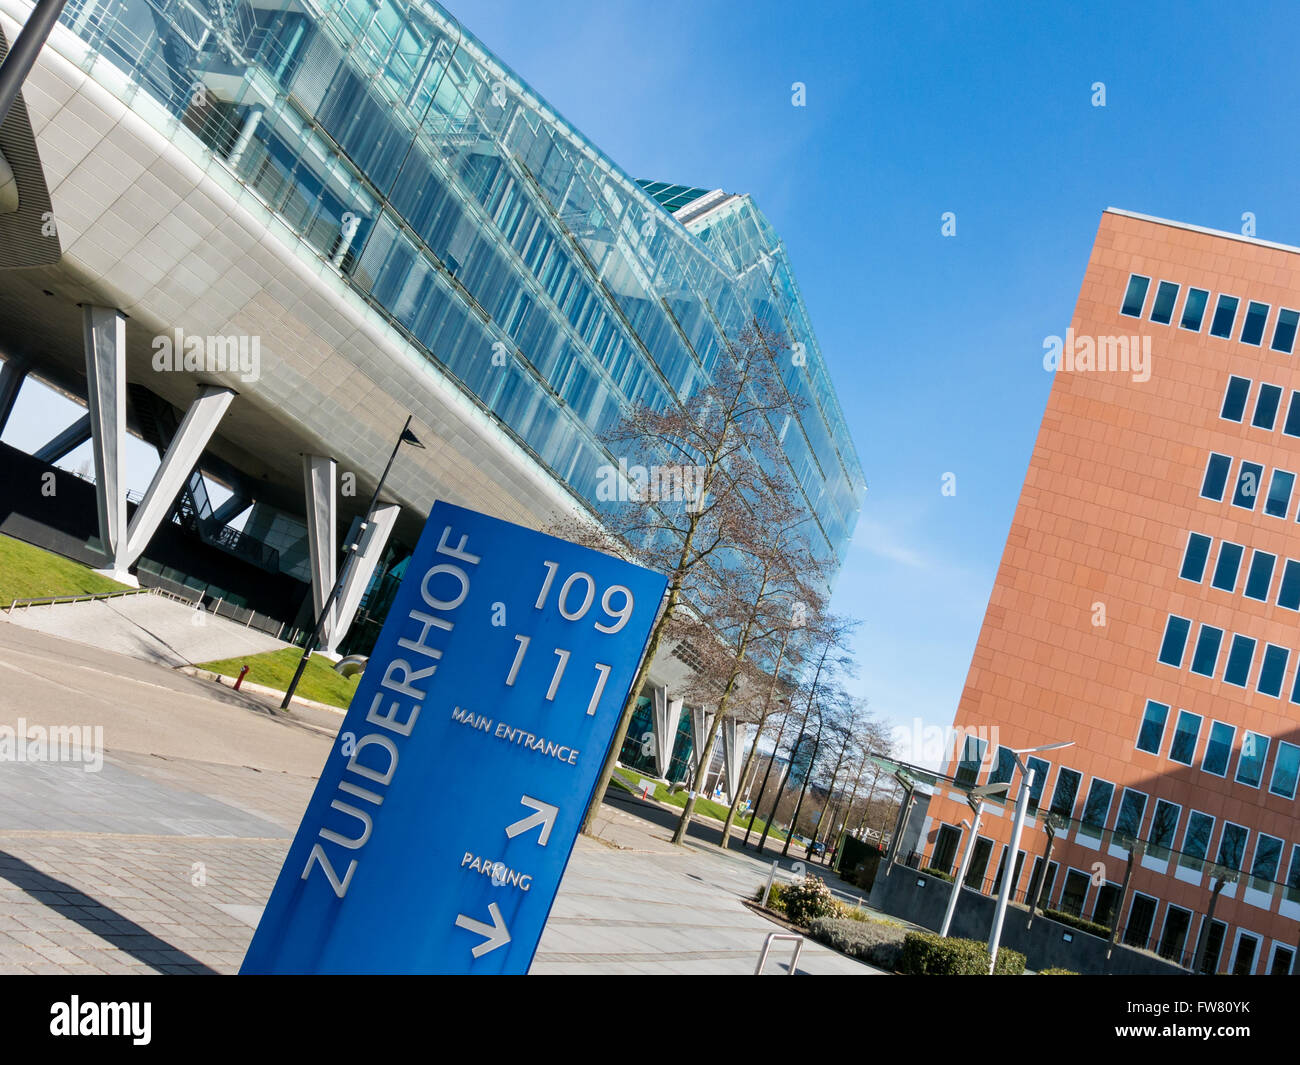 Parts of Zuiderhof and ING House buildings in Zuidas district, Amsterdam, Netherlands Stock Photo